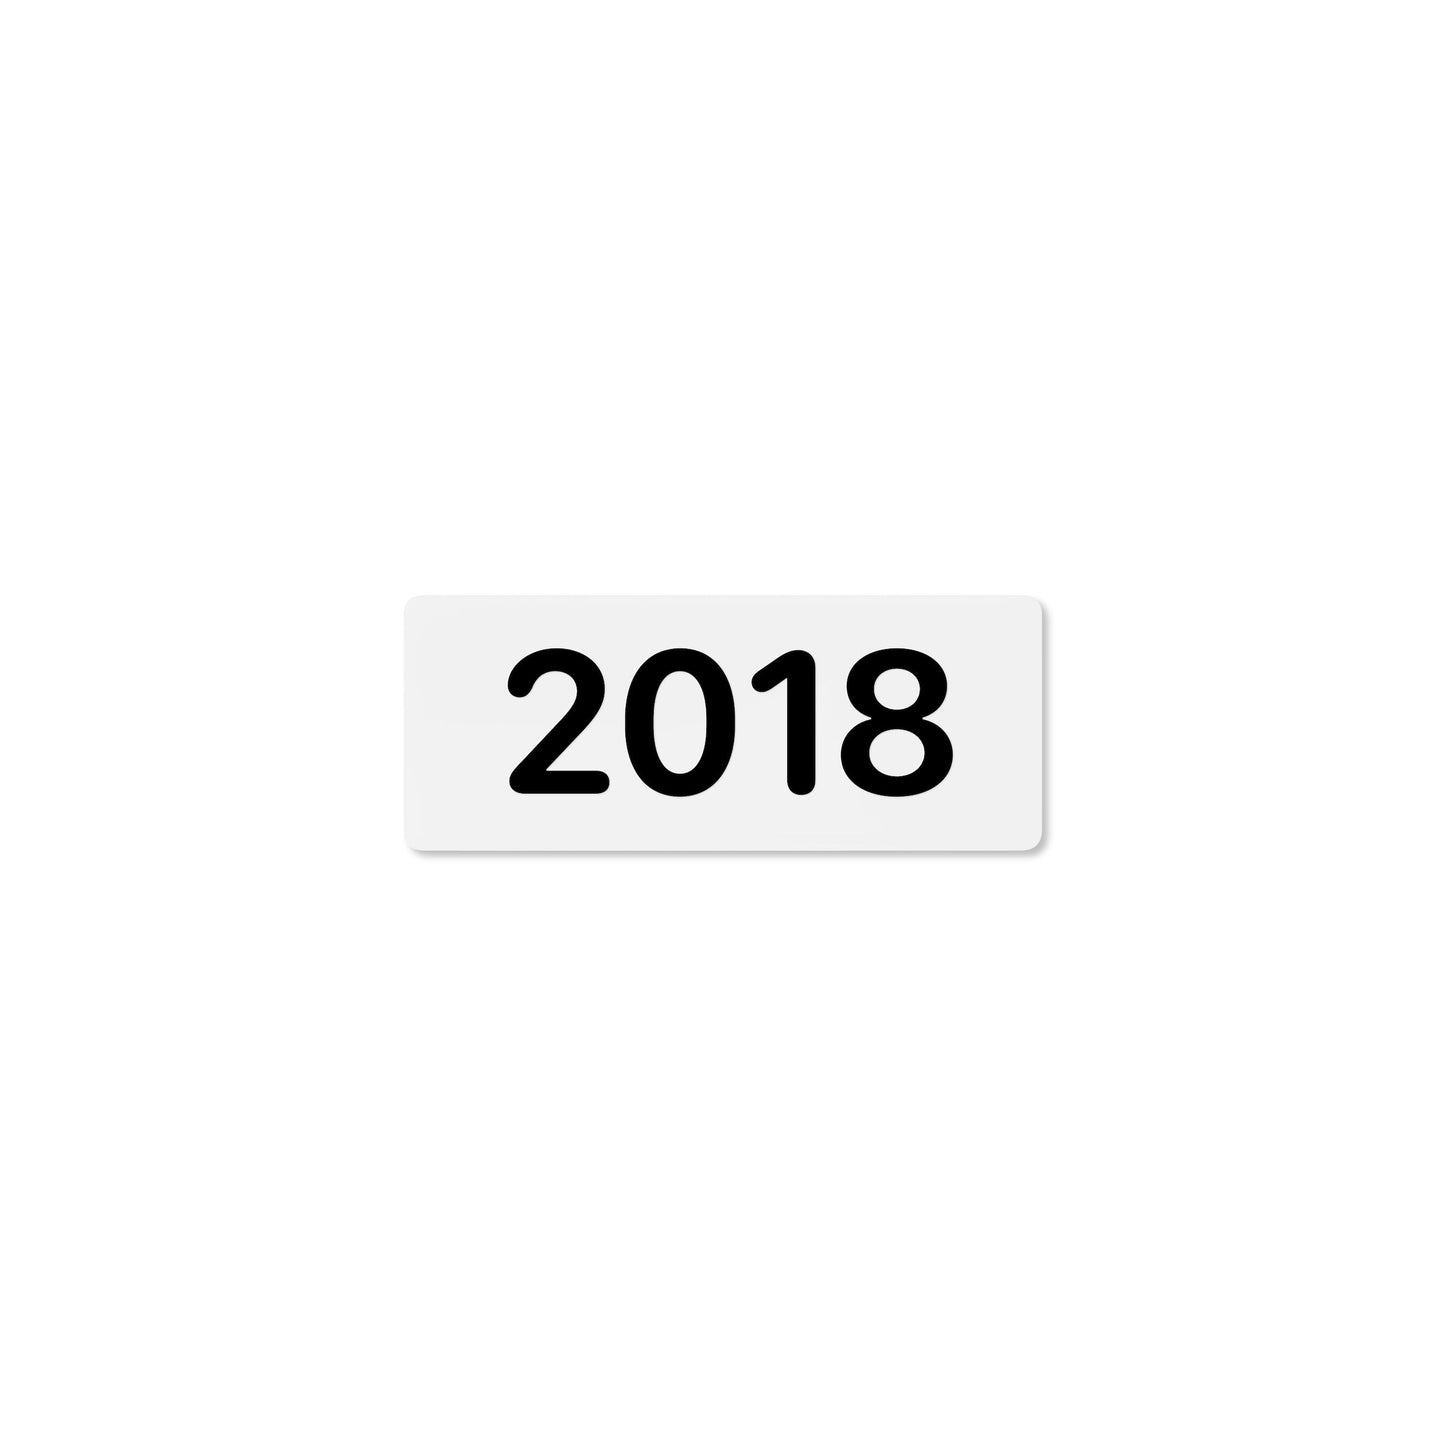 Numeral 2018